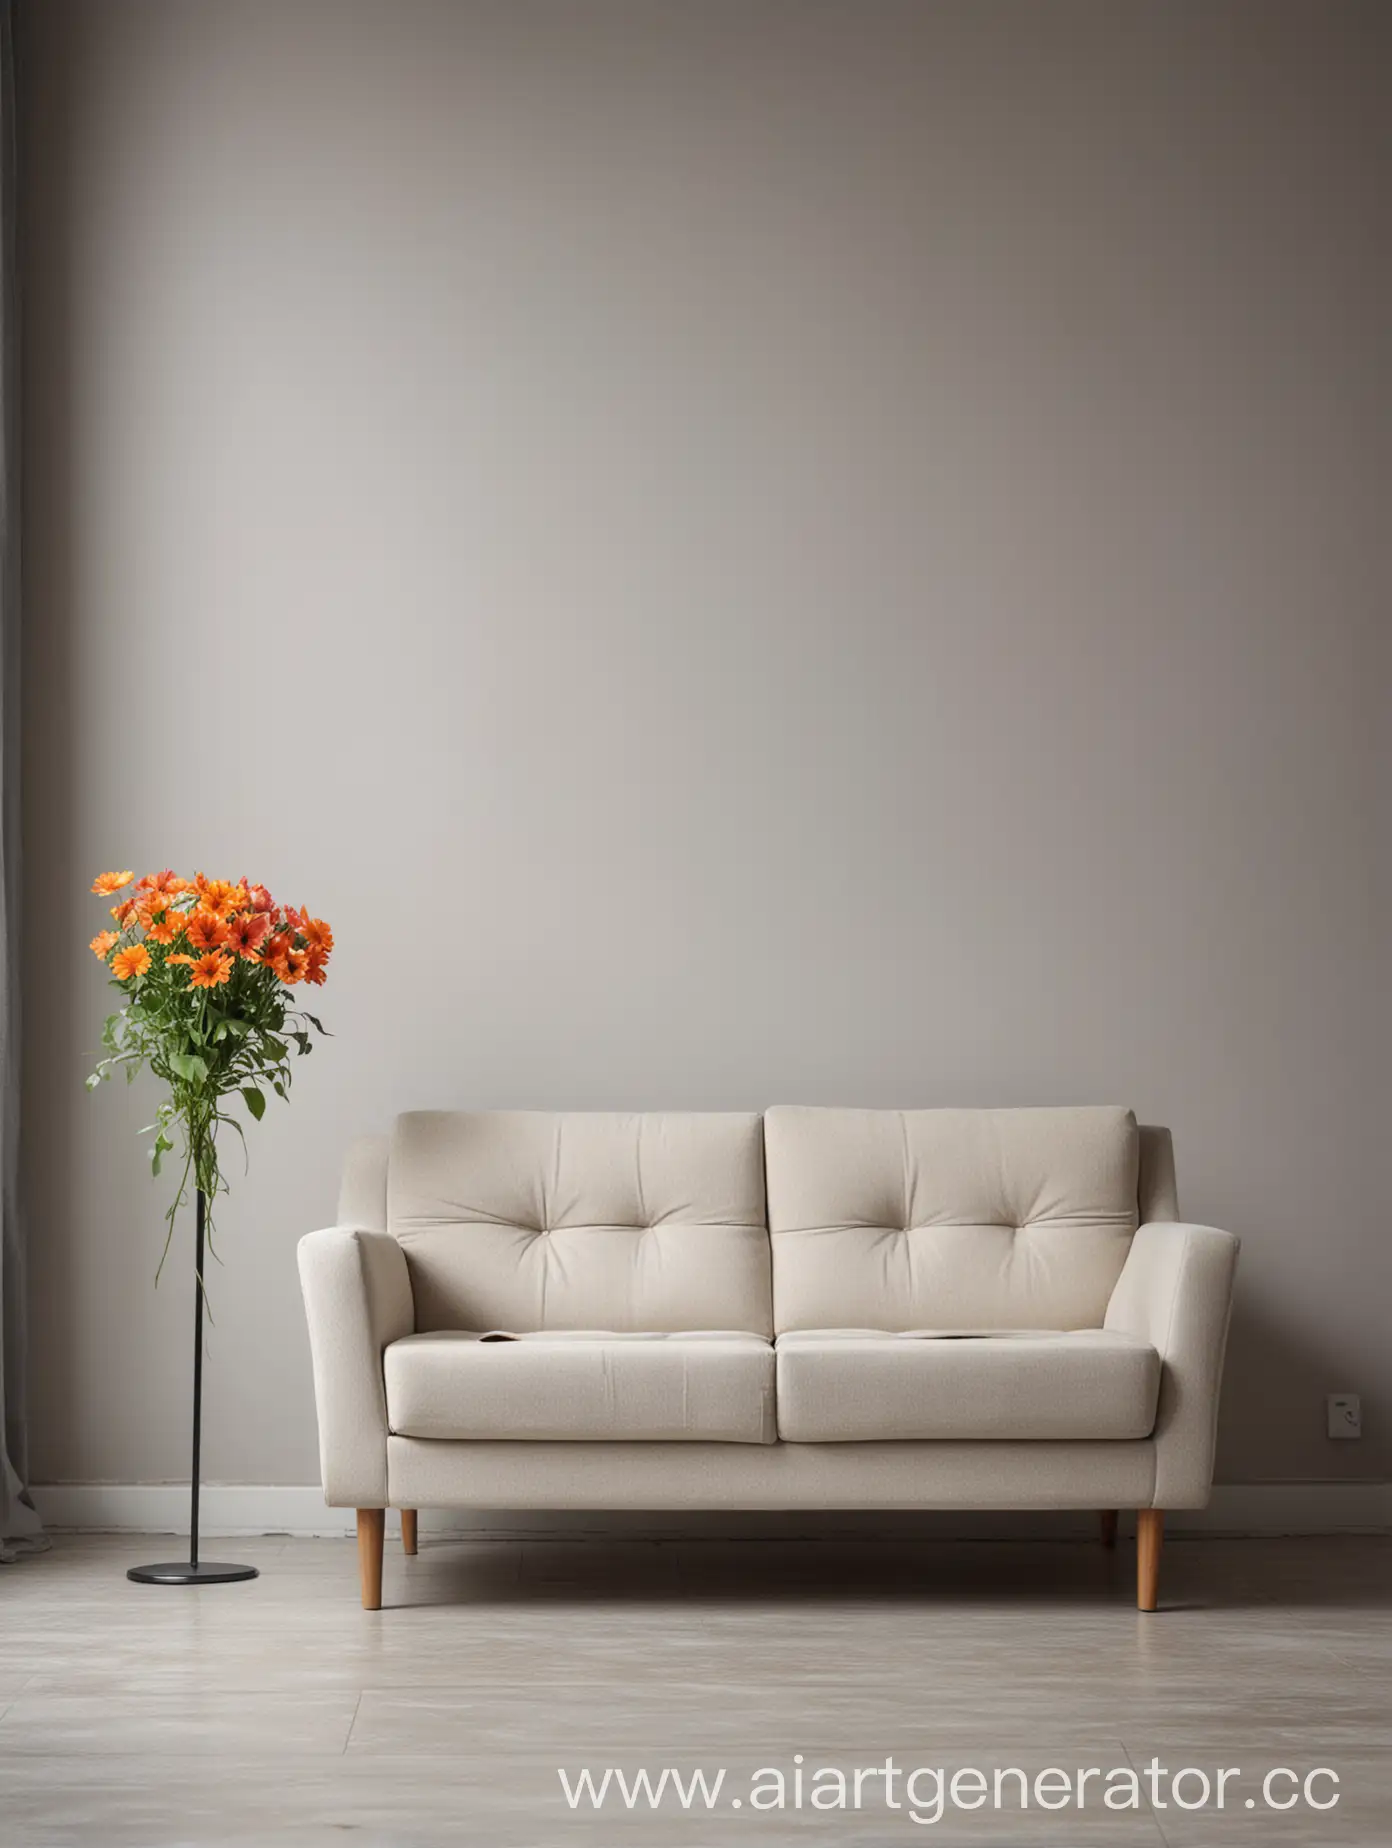 Minimalist-Living-Room-with-Empty-Sofa-and-Flower-Arrangement